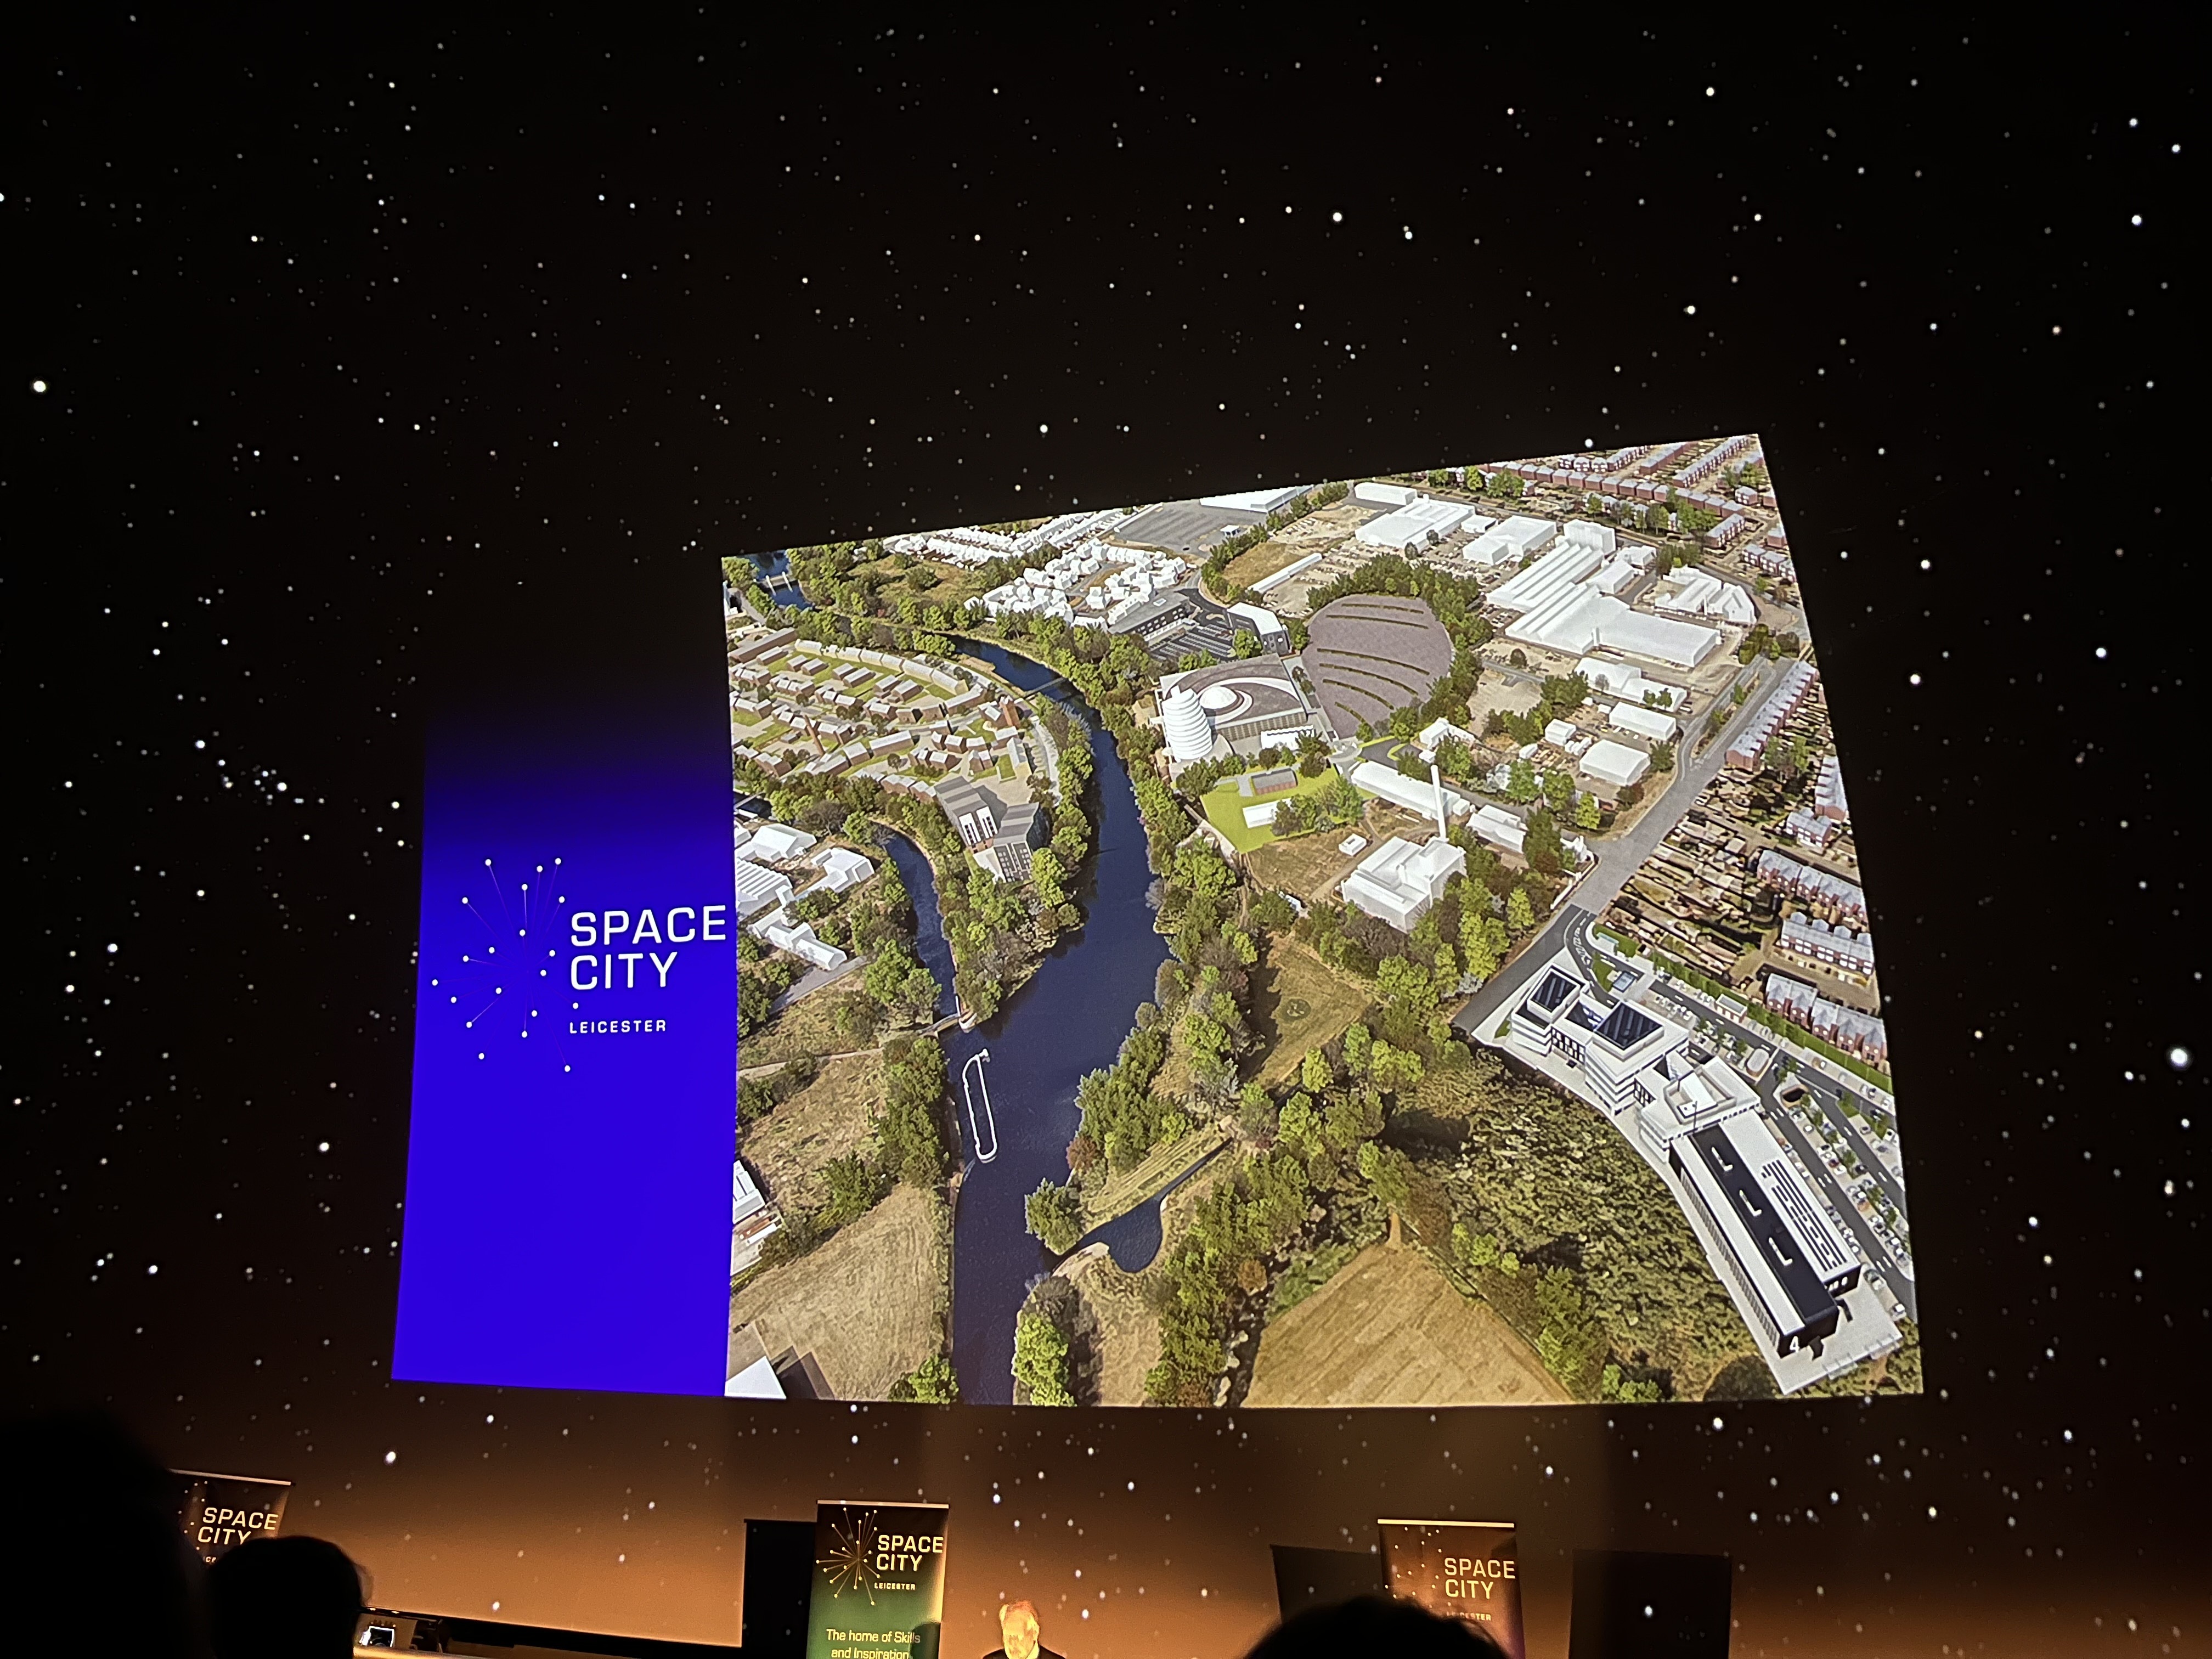 Image from the Space City Leicester launch event at the UK's National Space Centre.